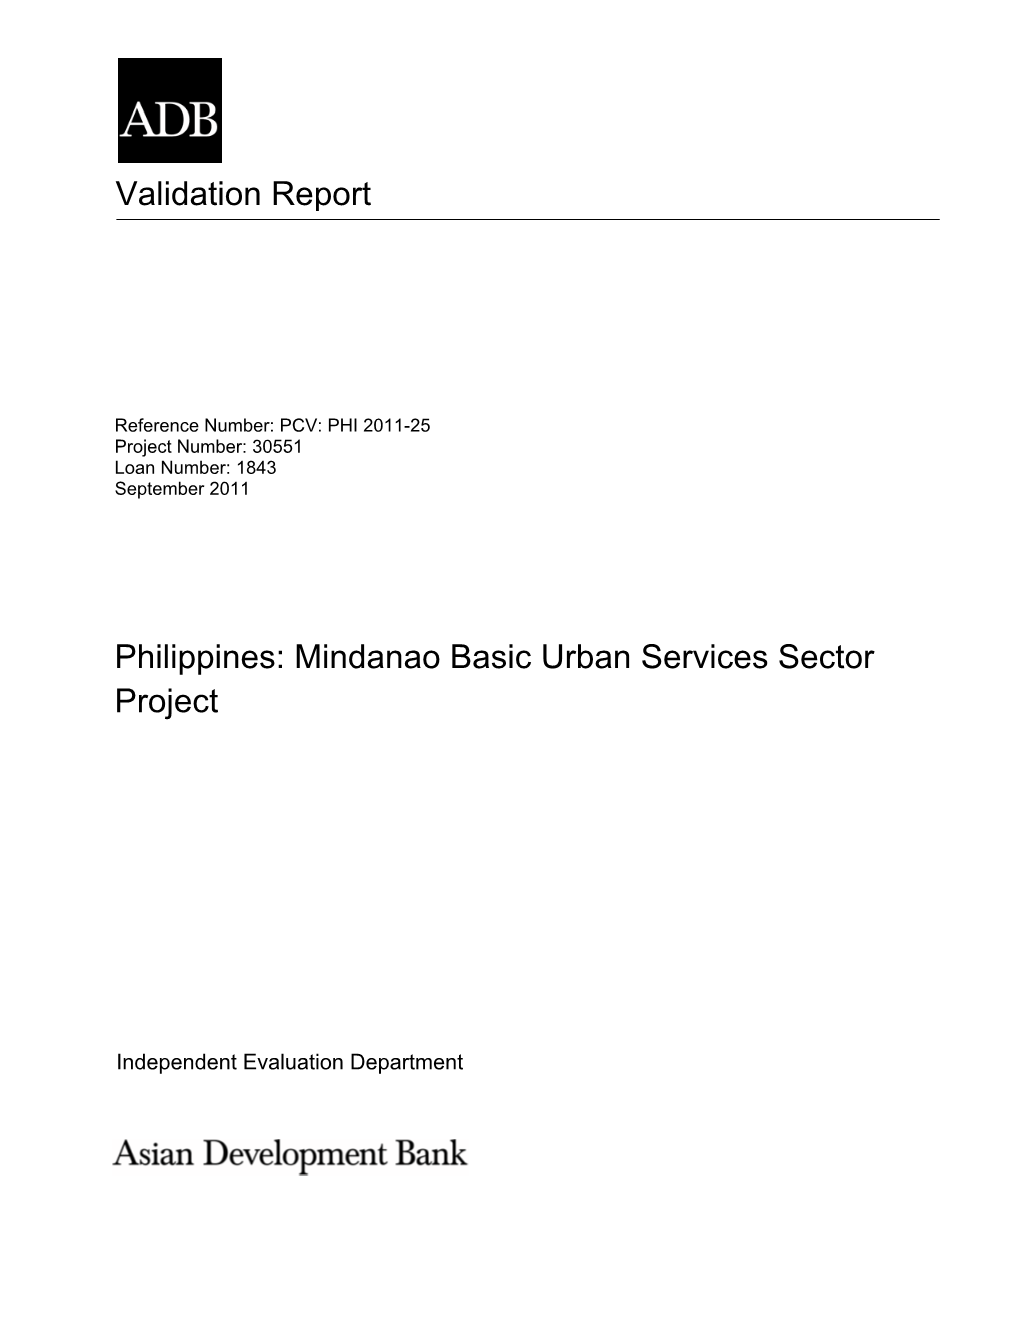 Philippines: Mindanao Basic Urban Services Sector Project